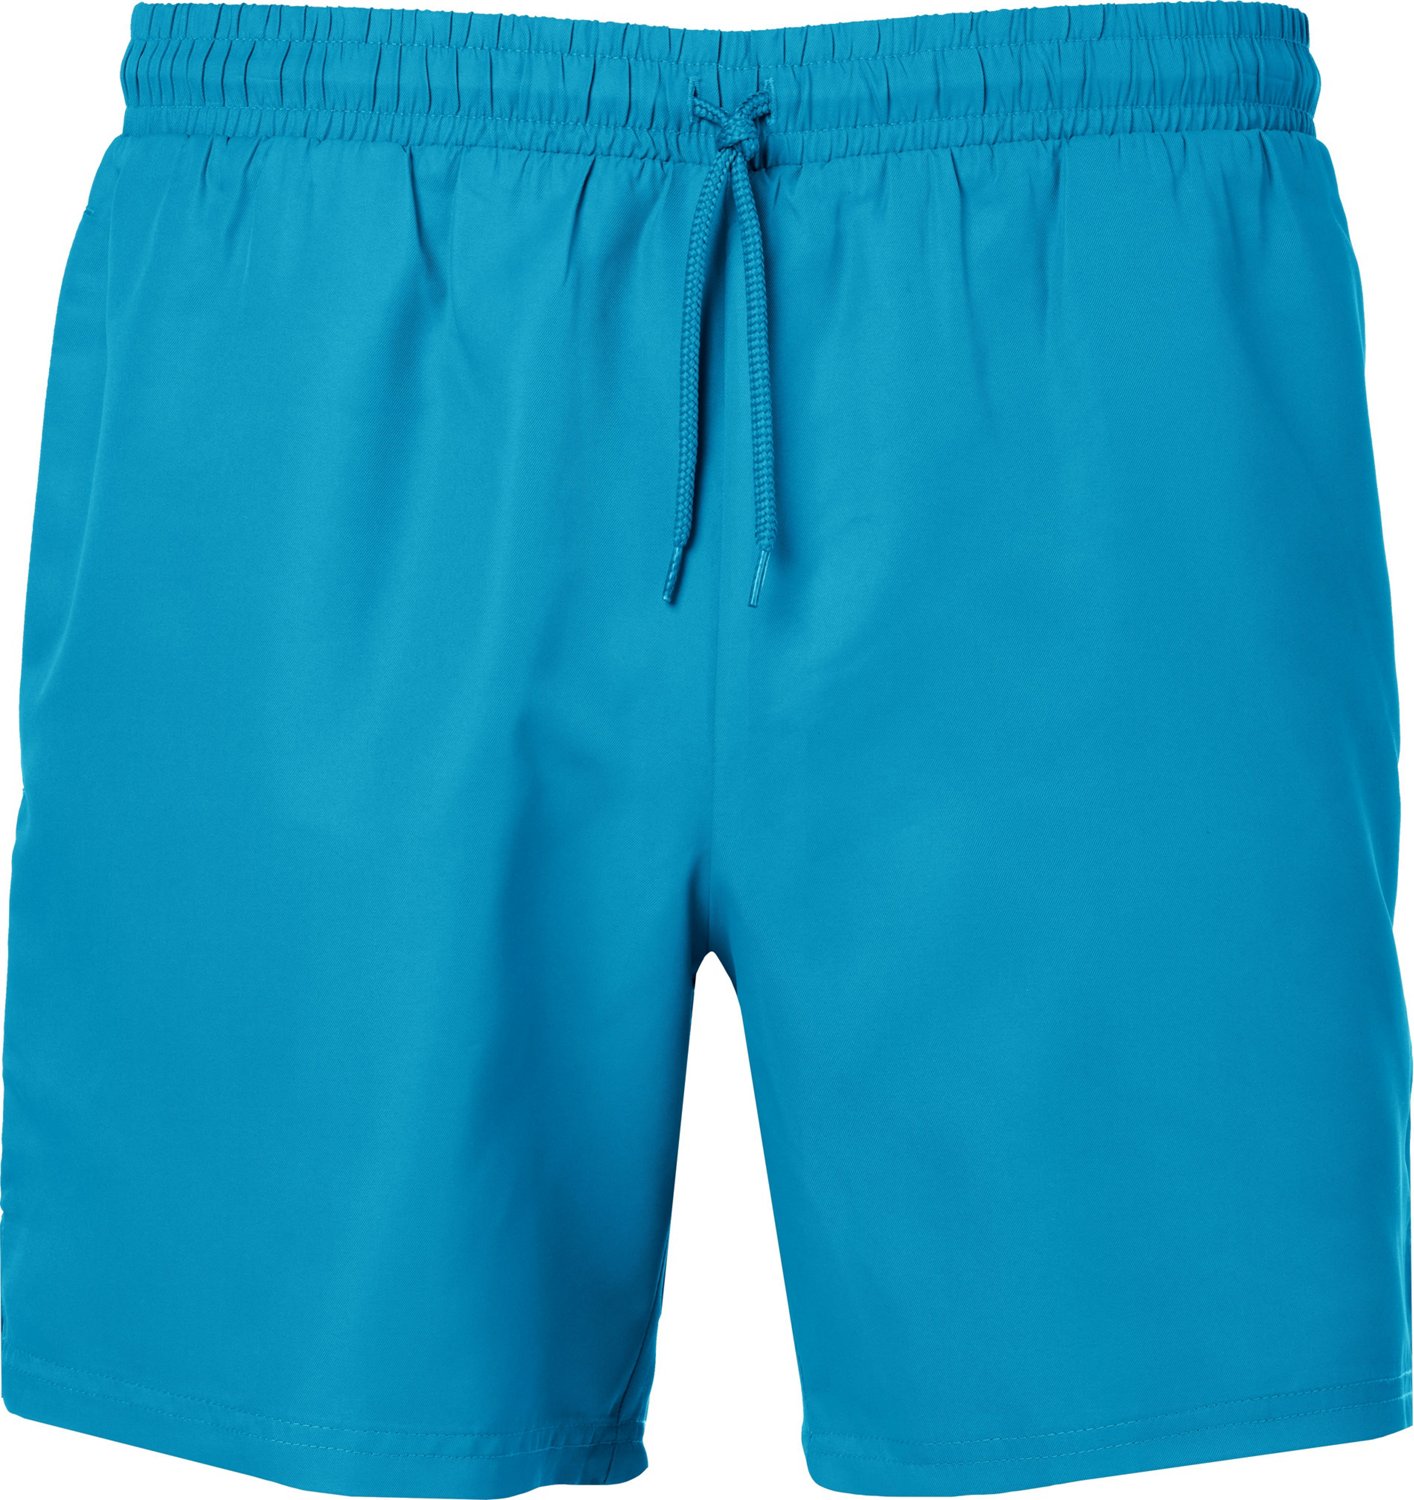 BCG Men’s Campus Training Shorts 6 in                                                                                          - view number 1 selected